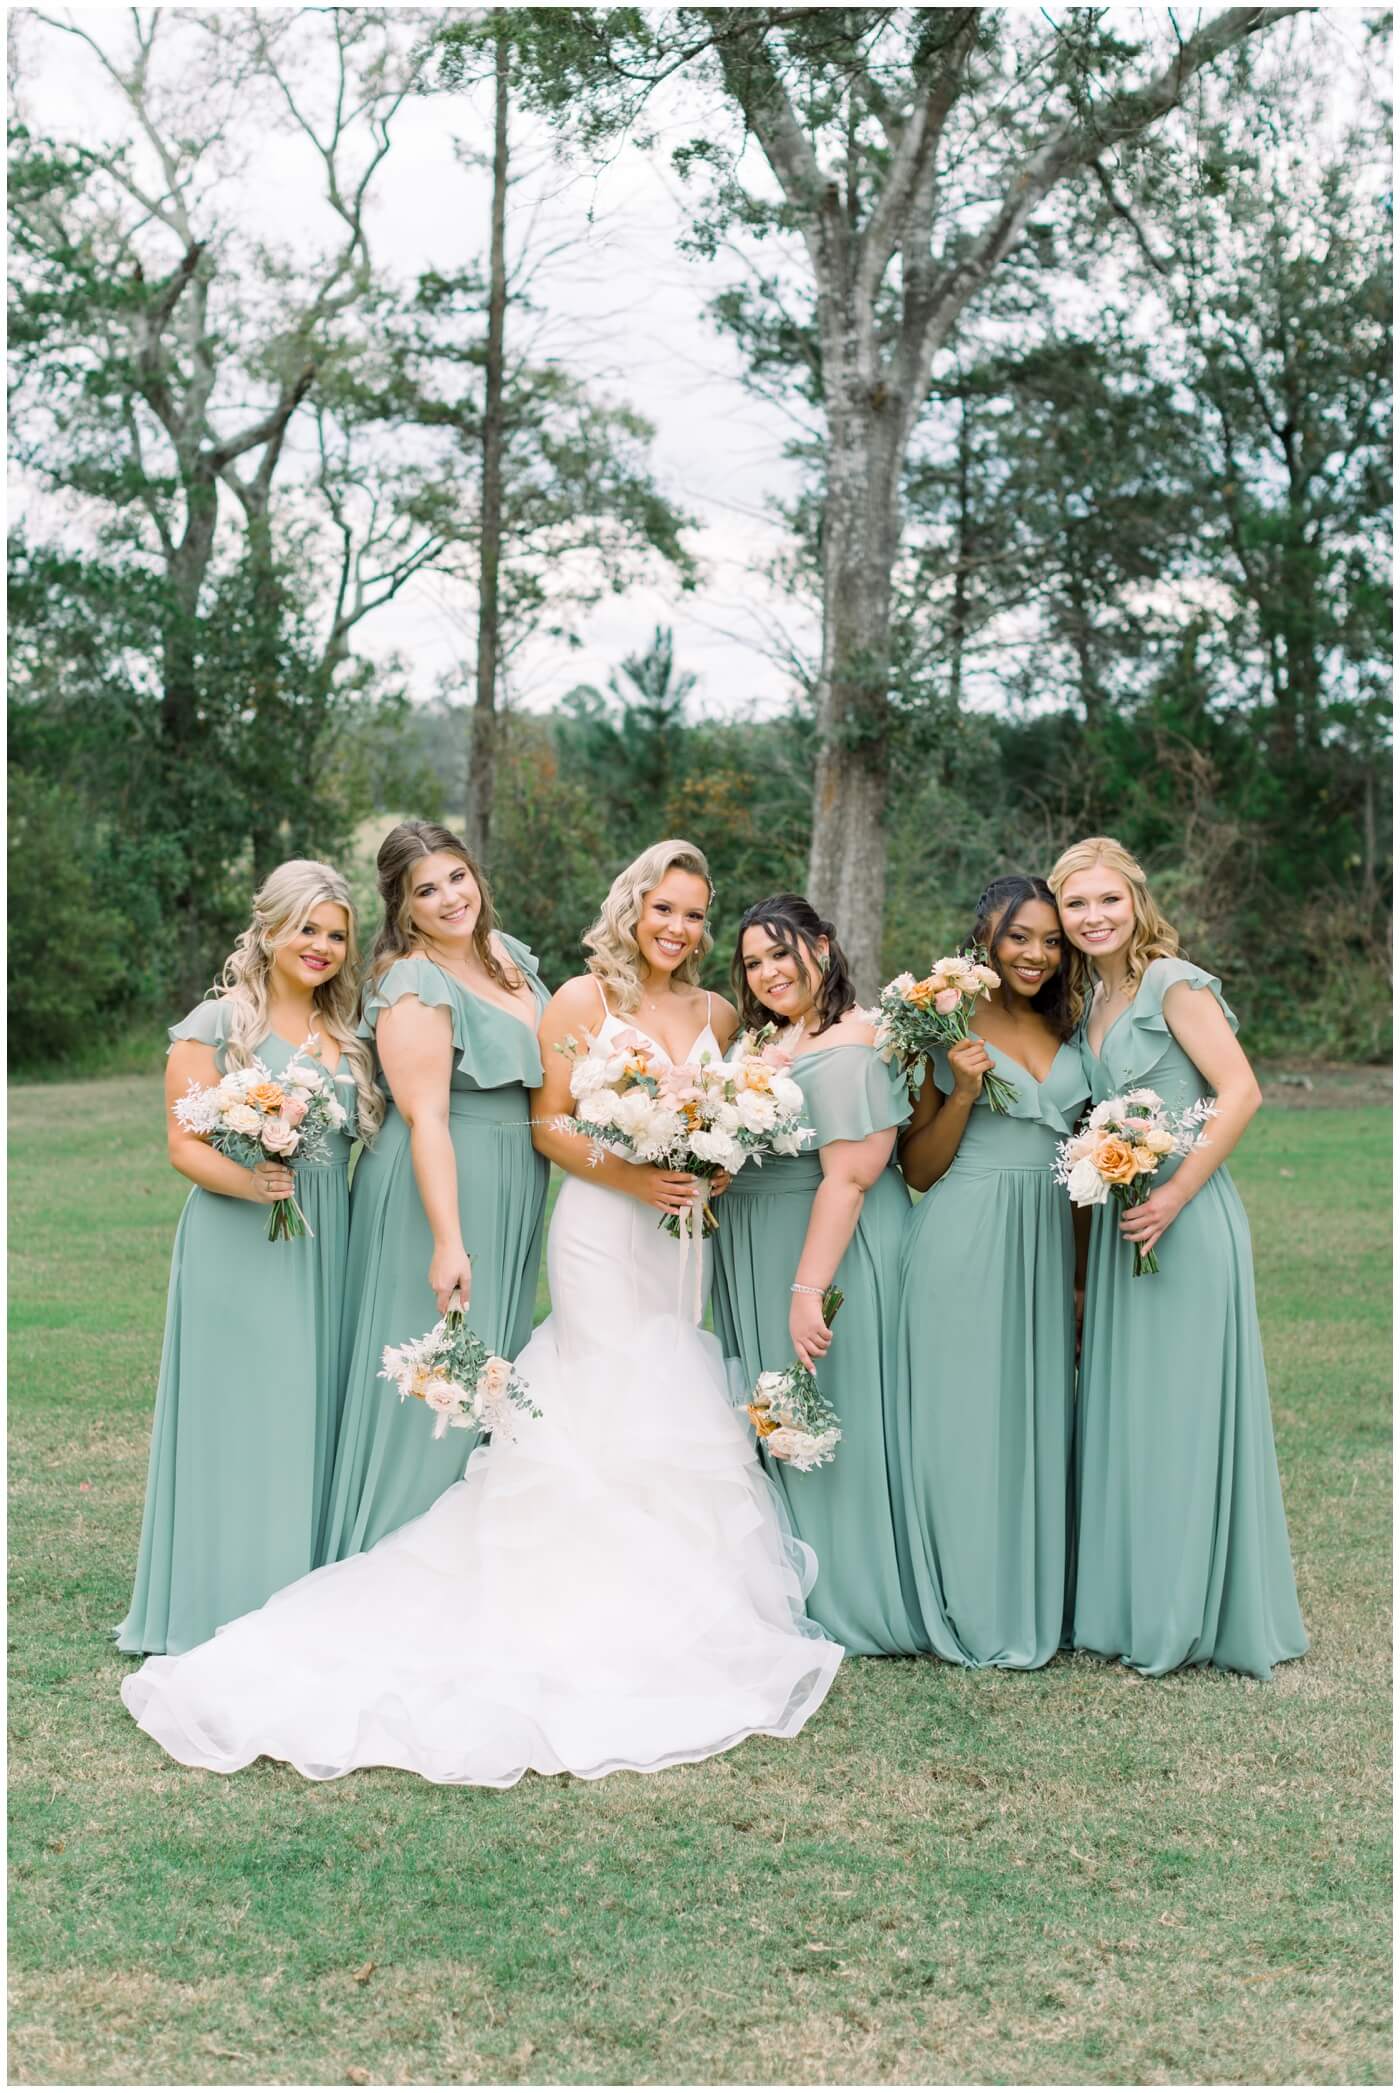 Houston Wedding at The Vine | the bride smiling with her bridesmaids